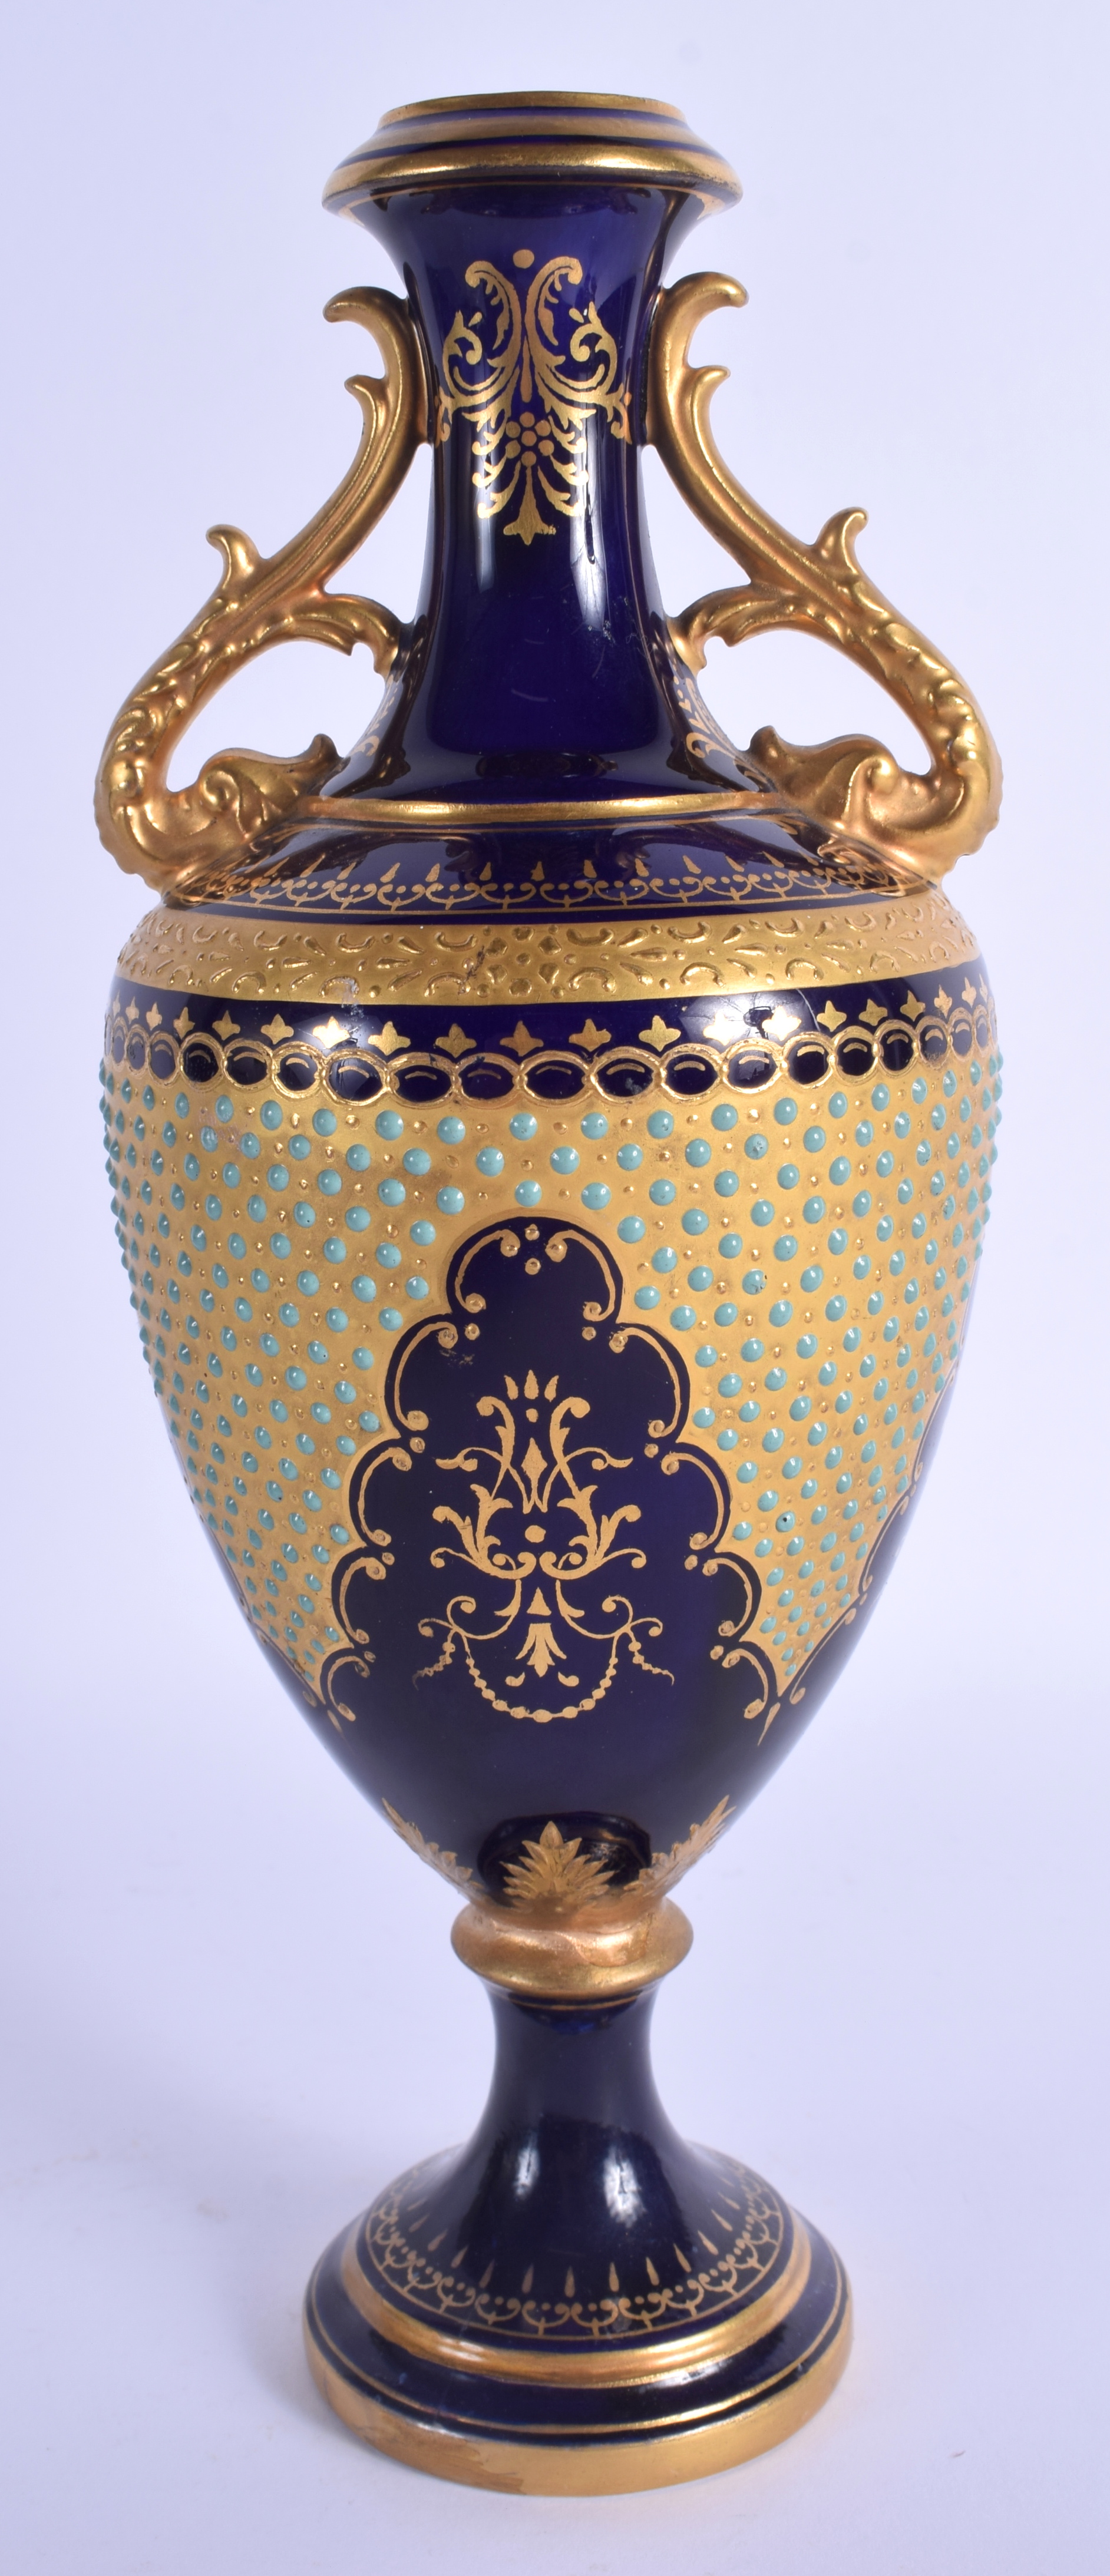 A 19TH CENTURY COALPORT TWIN HANDLED PORCELAIN VASE jewelled with turquoise sprays. 24 cm x 7 cm. - Image 3 of 6